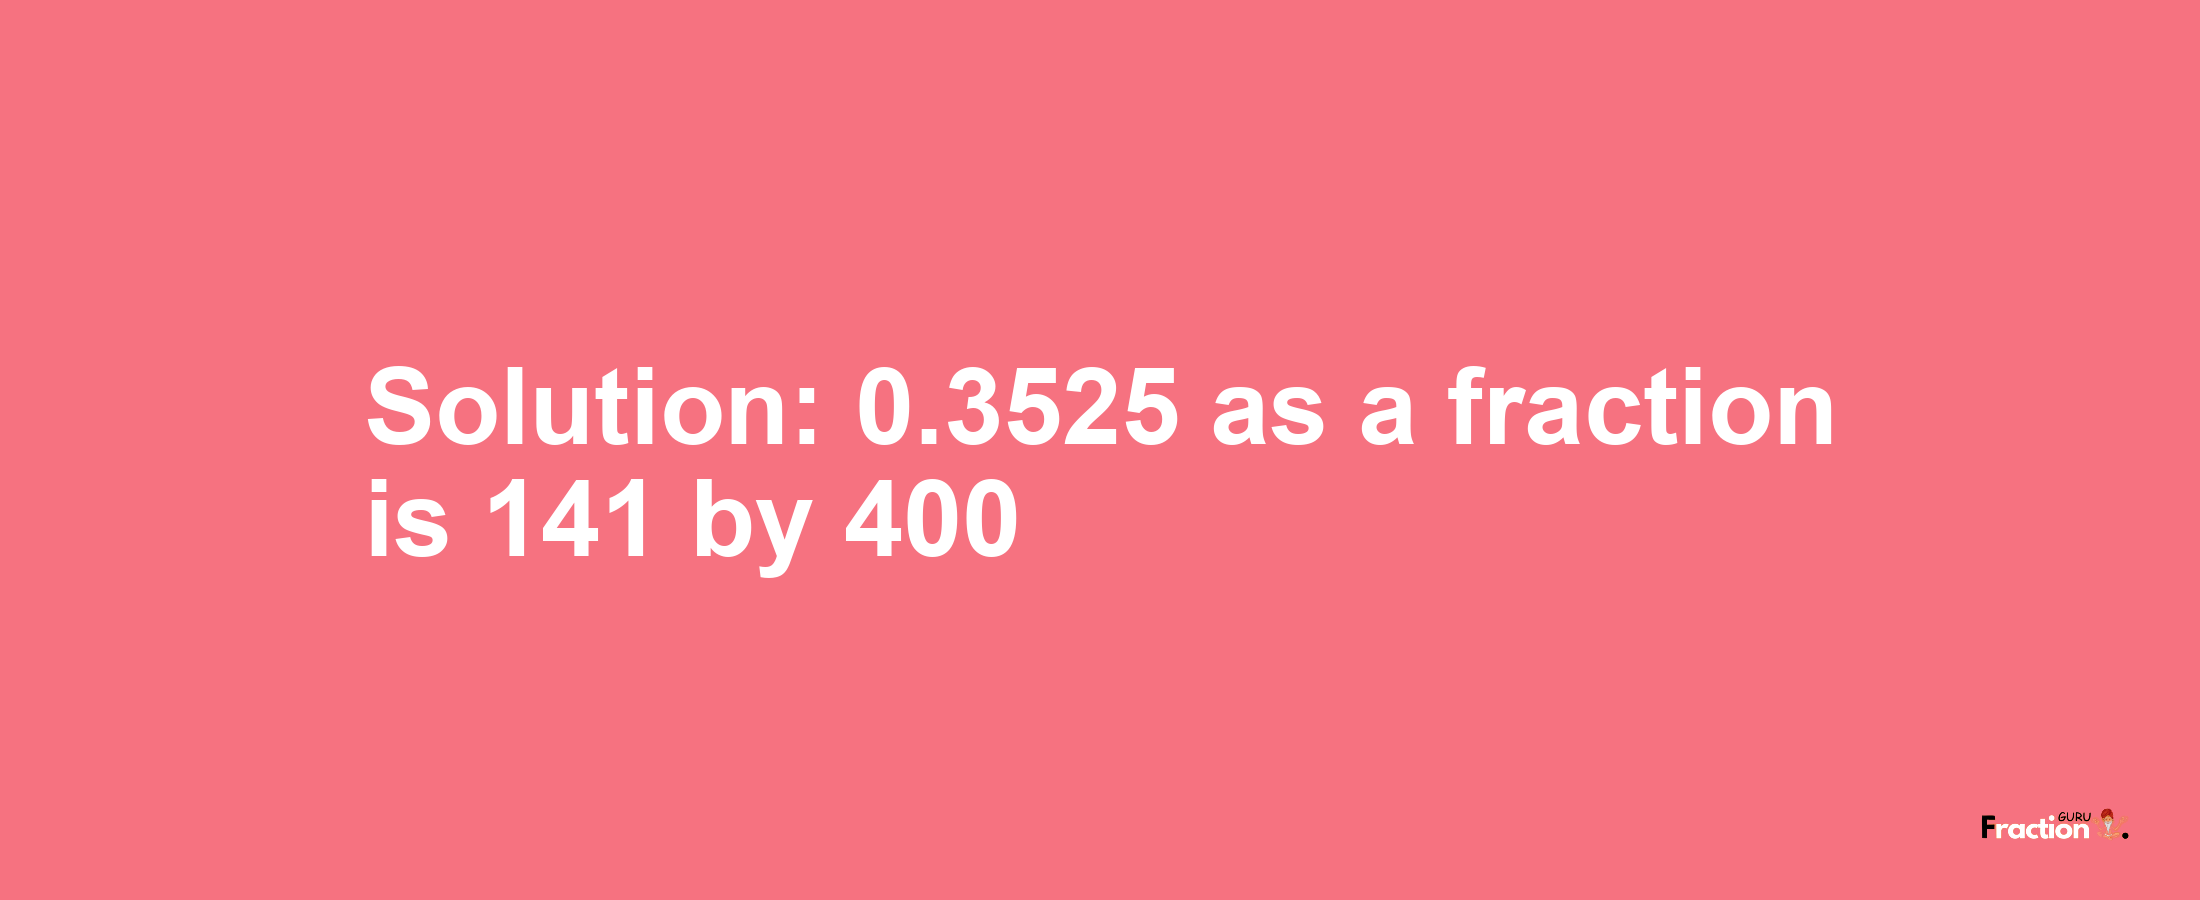 Solution:0.3525 as a fraction is 141/400